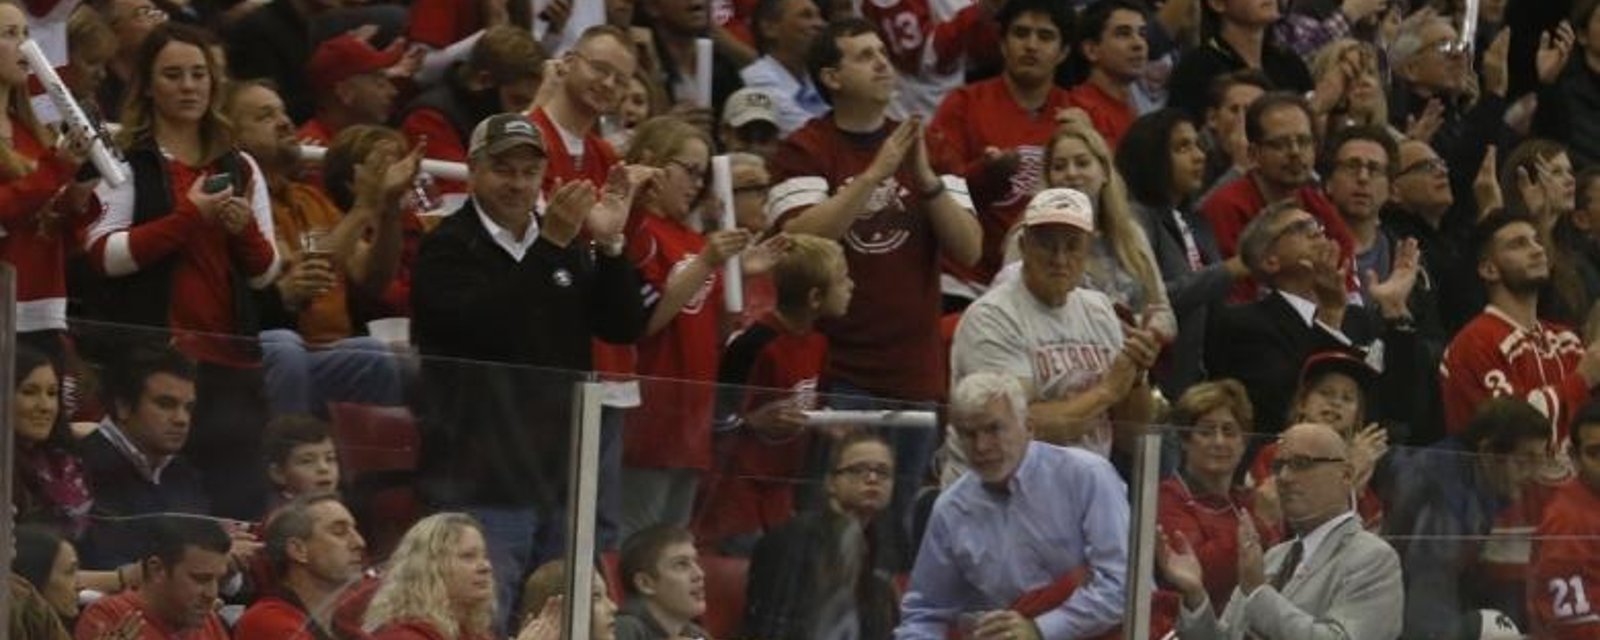 Red Wing and Leaf fans battle with duelling chants this evening.